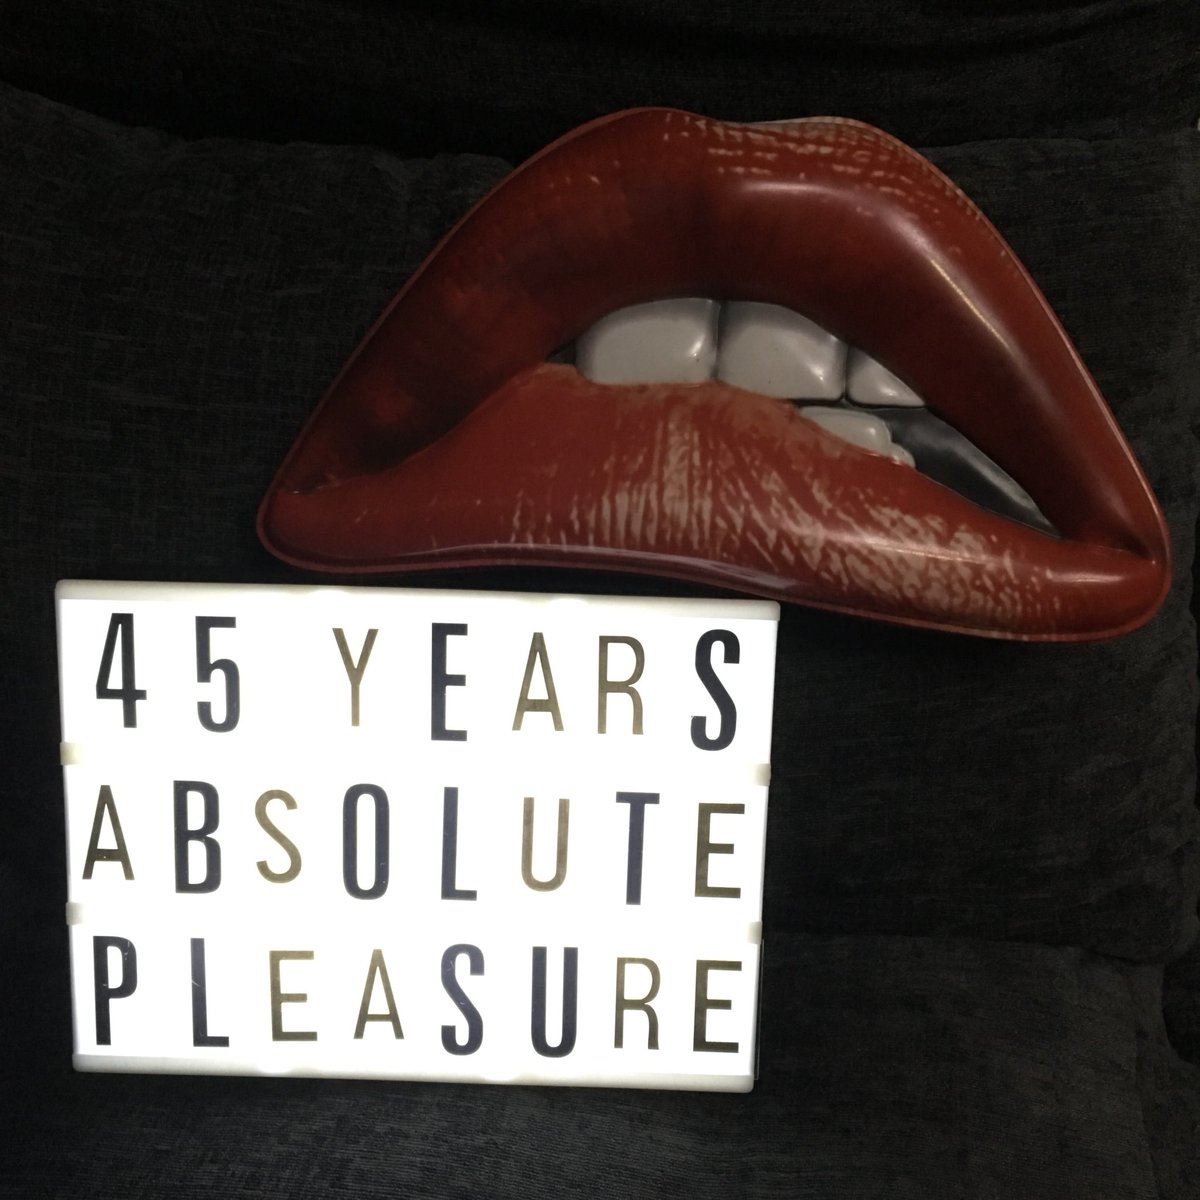 Today is 45 years since The Rocky Horror Show opened Upstairs in the Royal Court Theatre 🎭 #rockyhorror #rockyhorrorshow #absolutepleasure